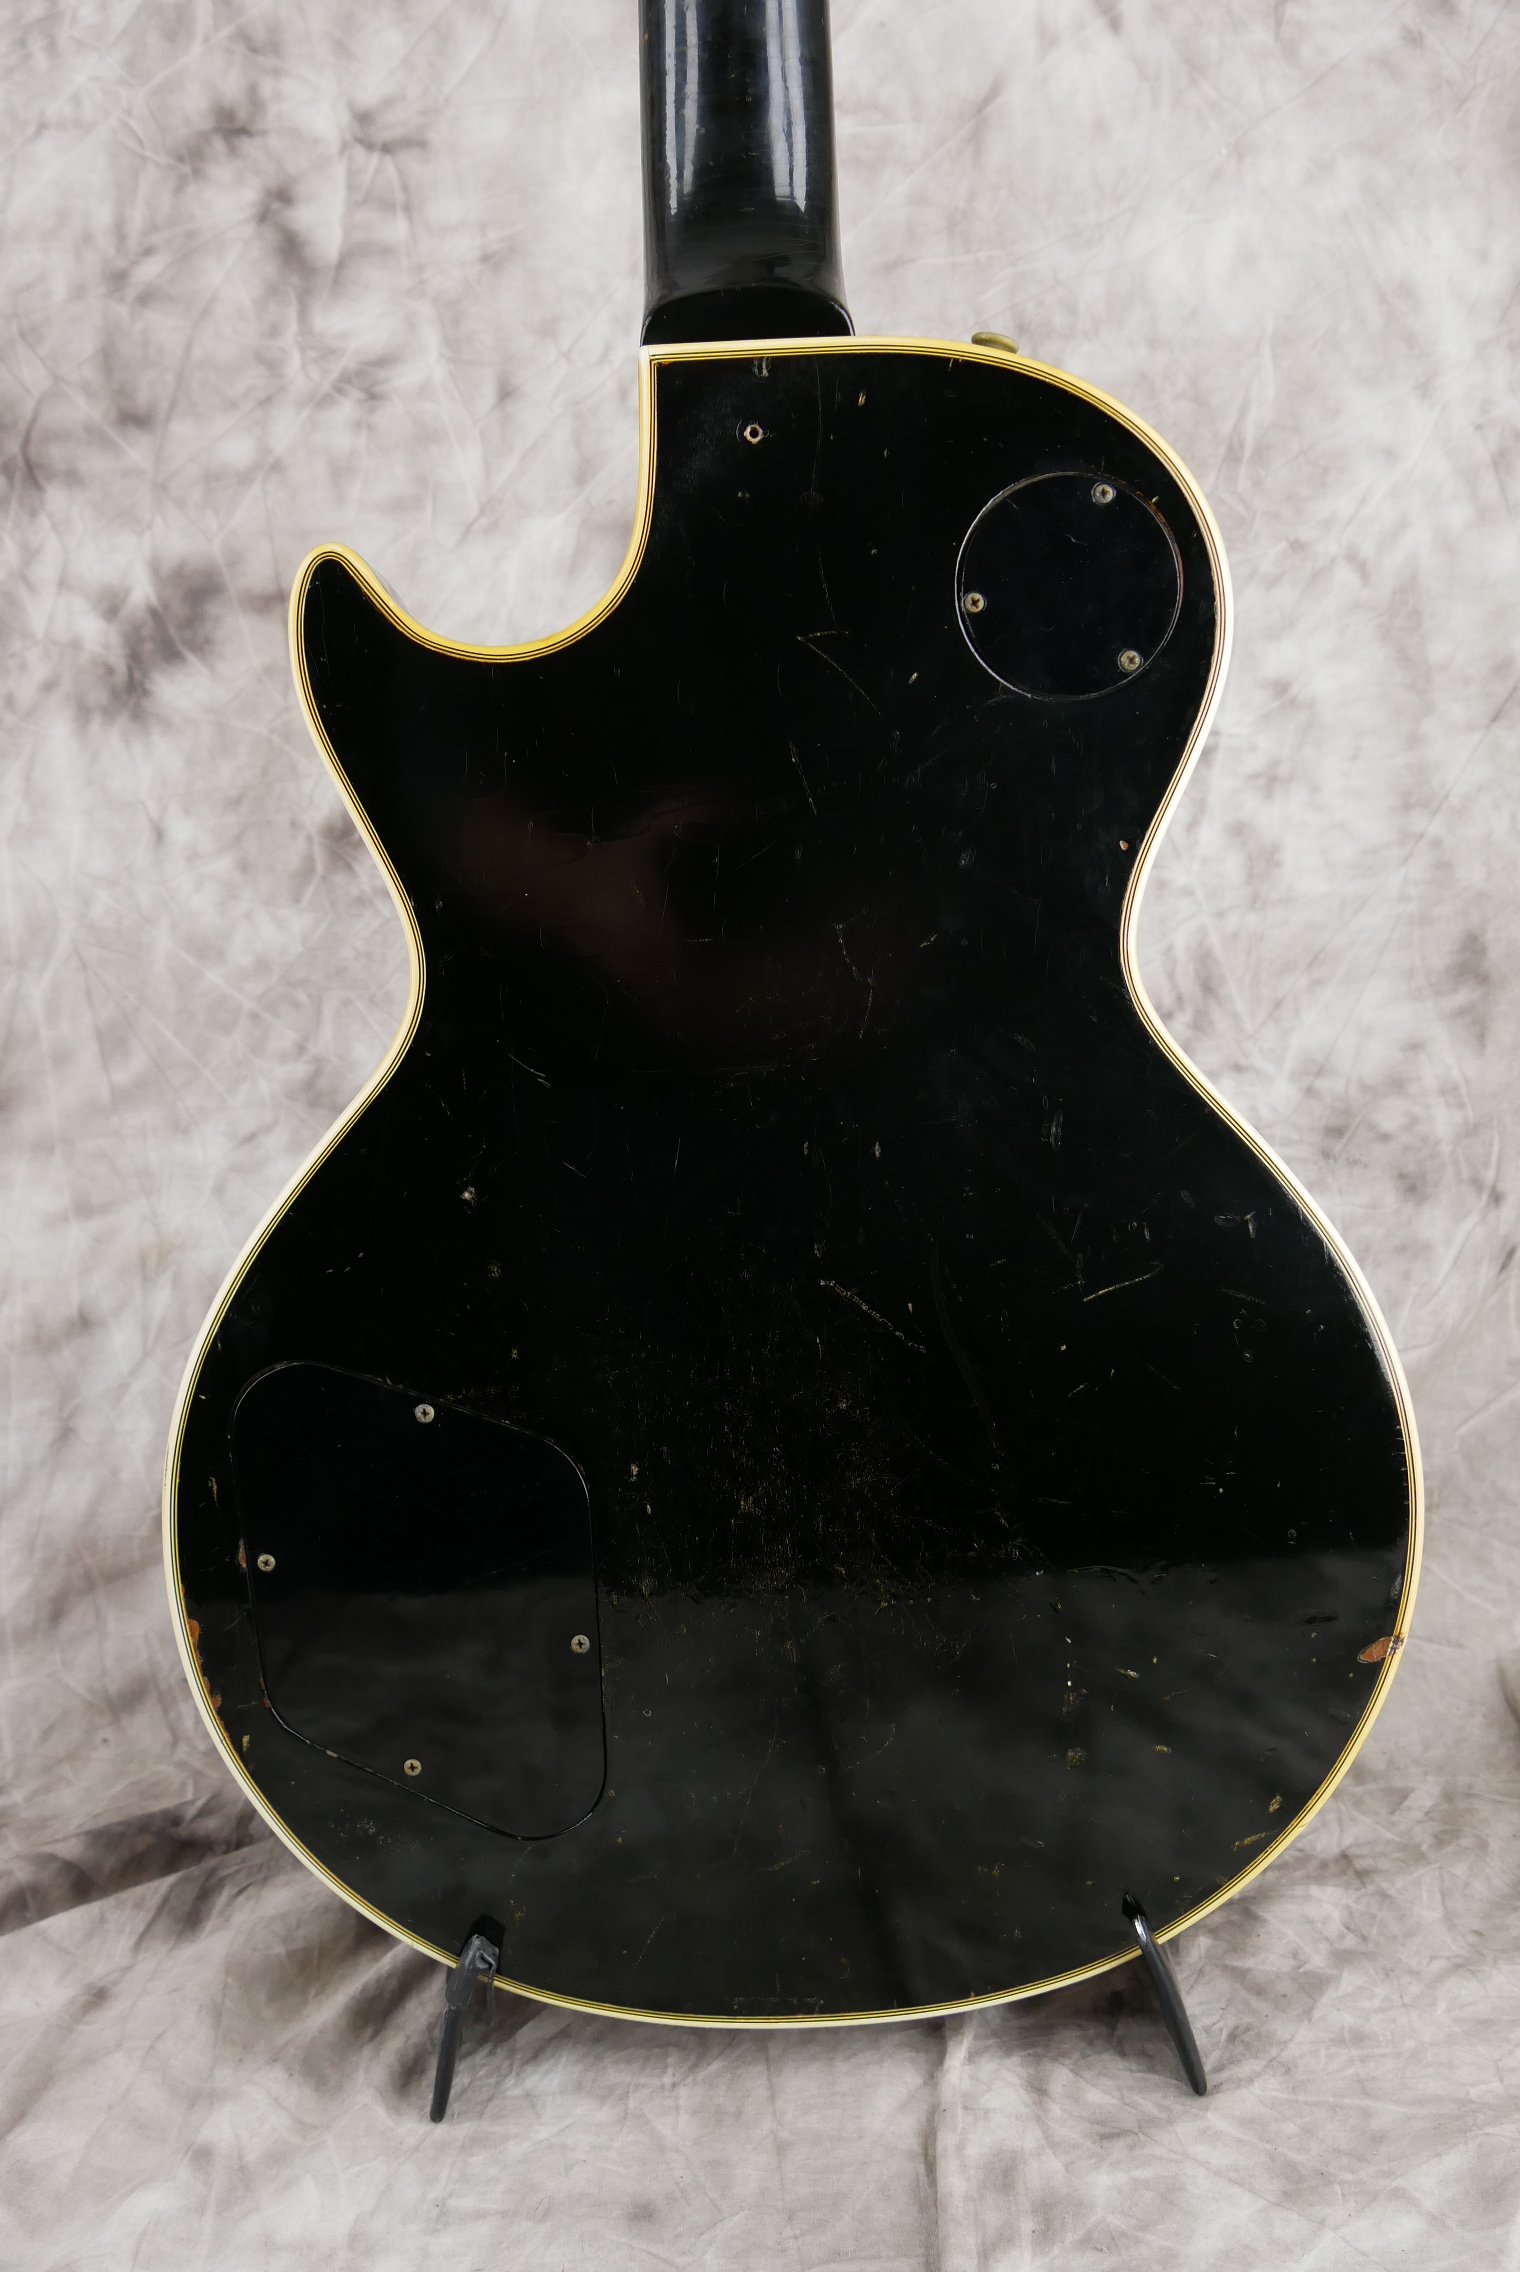 img/vintage/5115/Gibson-Les-Paul-Custom-1969-one-piece-body-and-neck-004.JPG